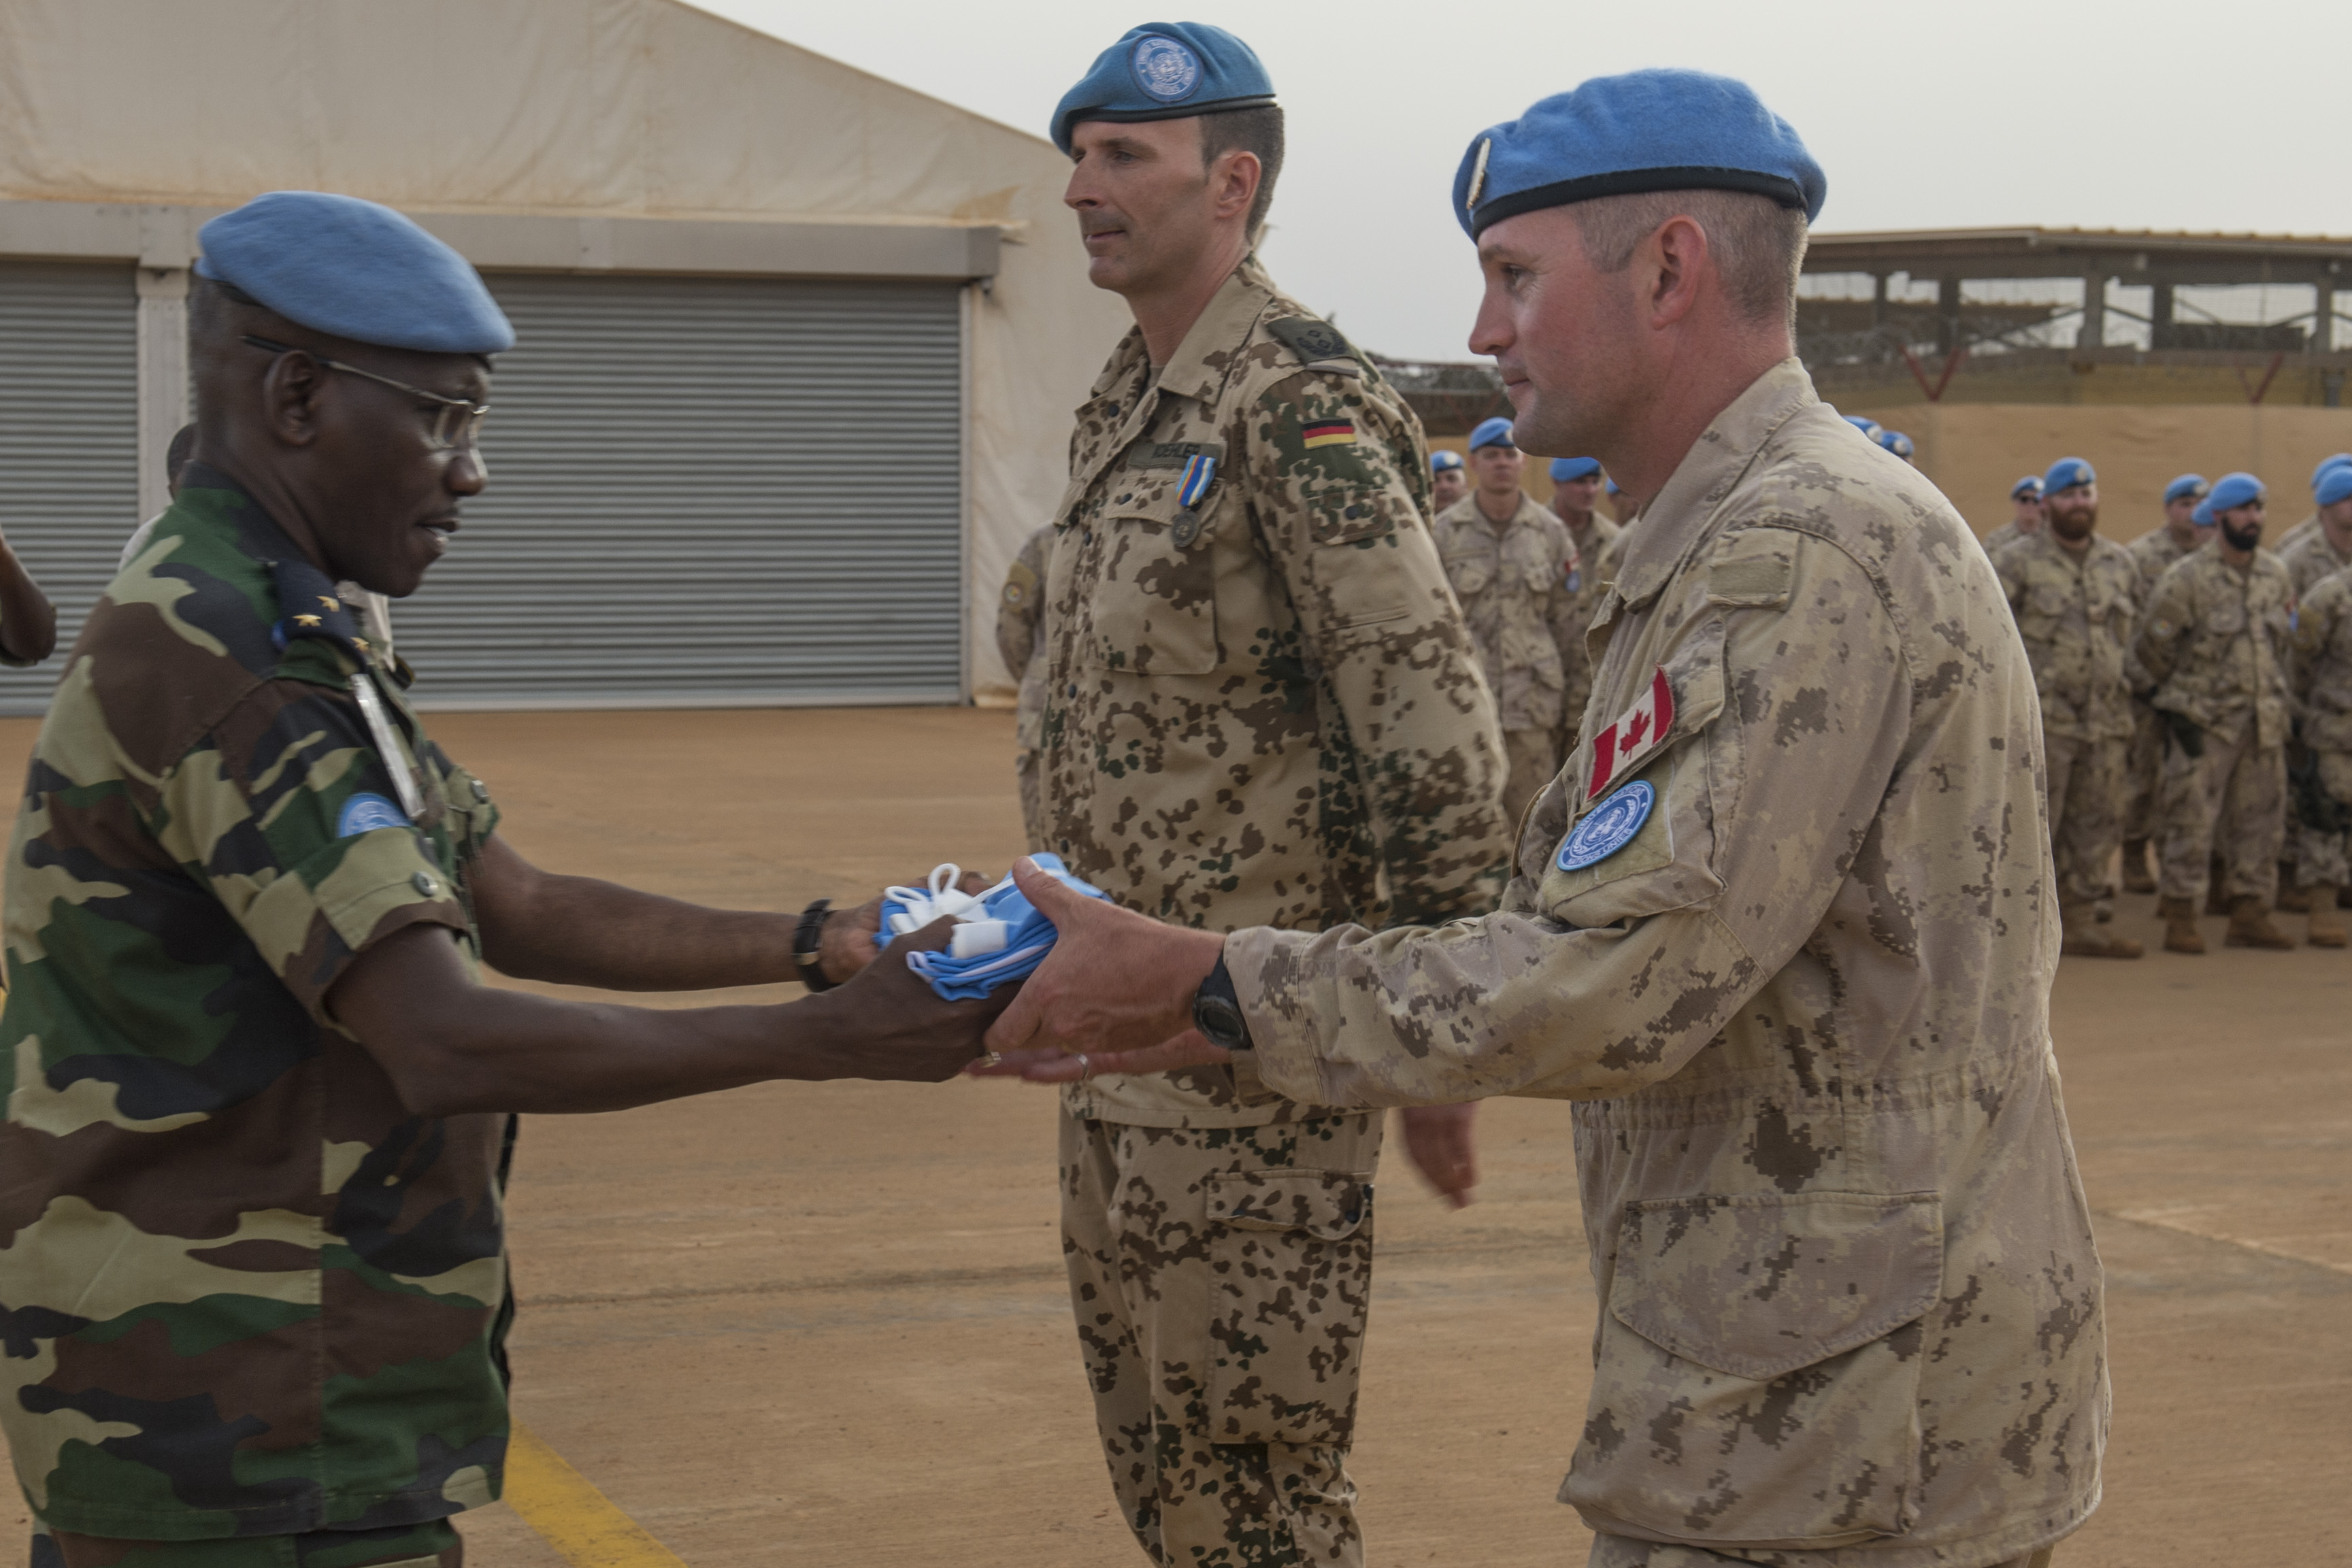 A soldier passes a United Nations flag to another soldier